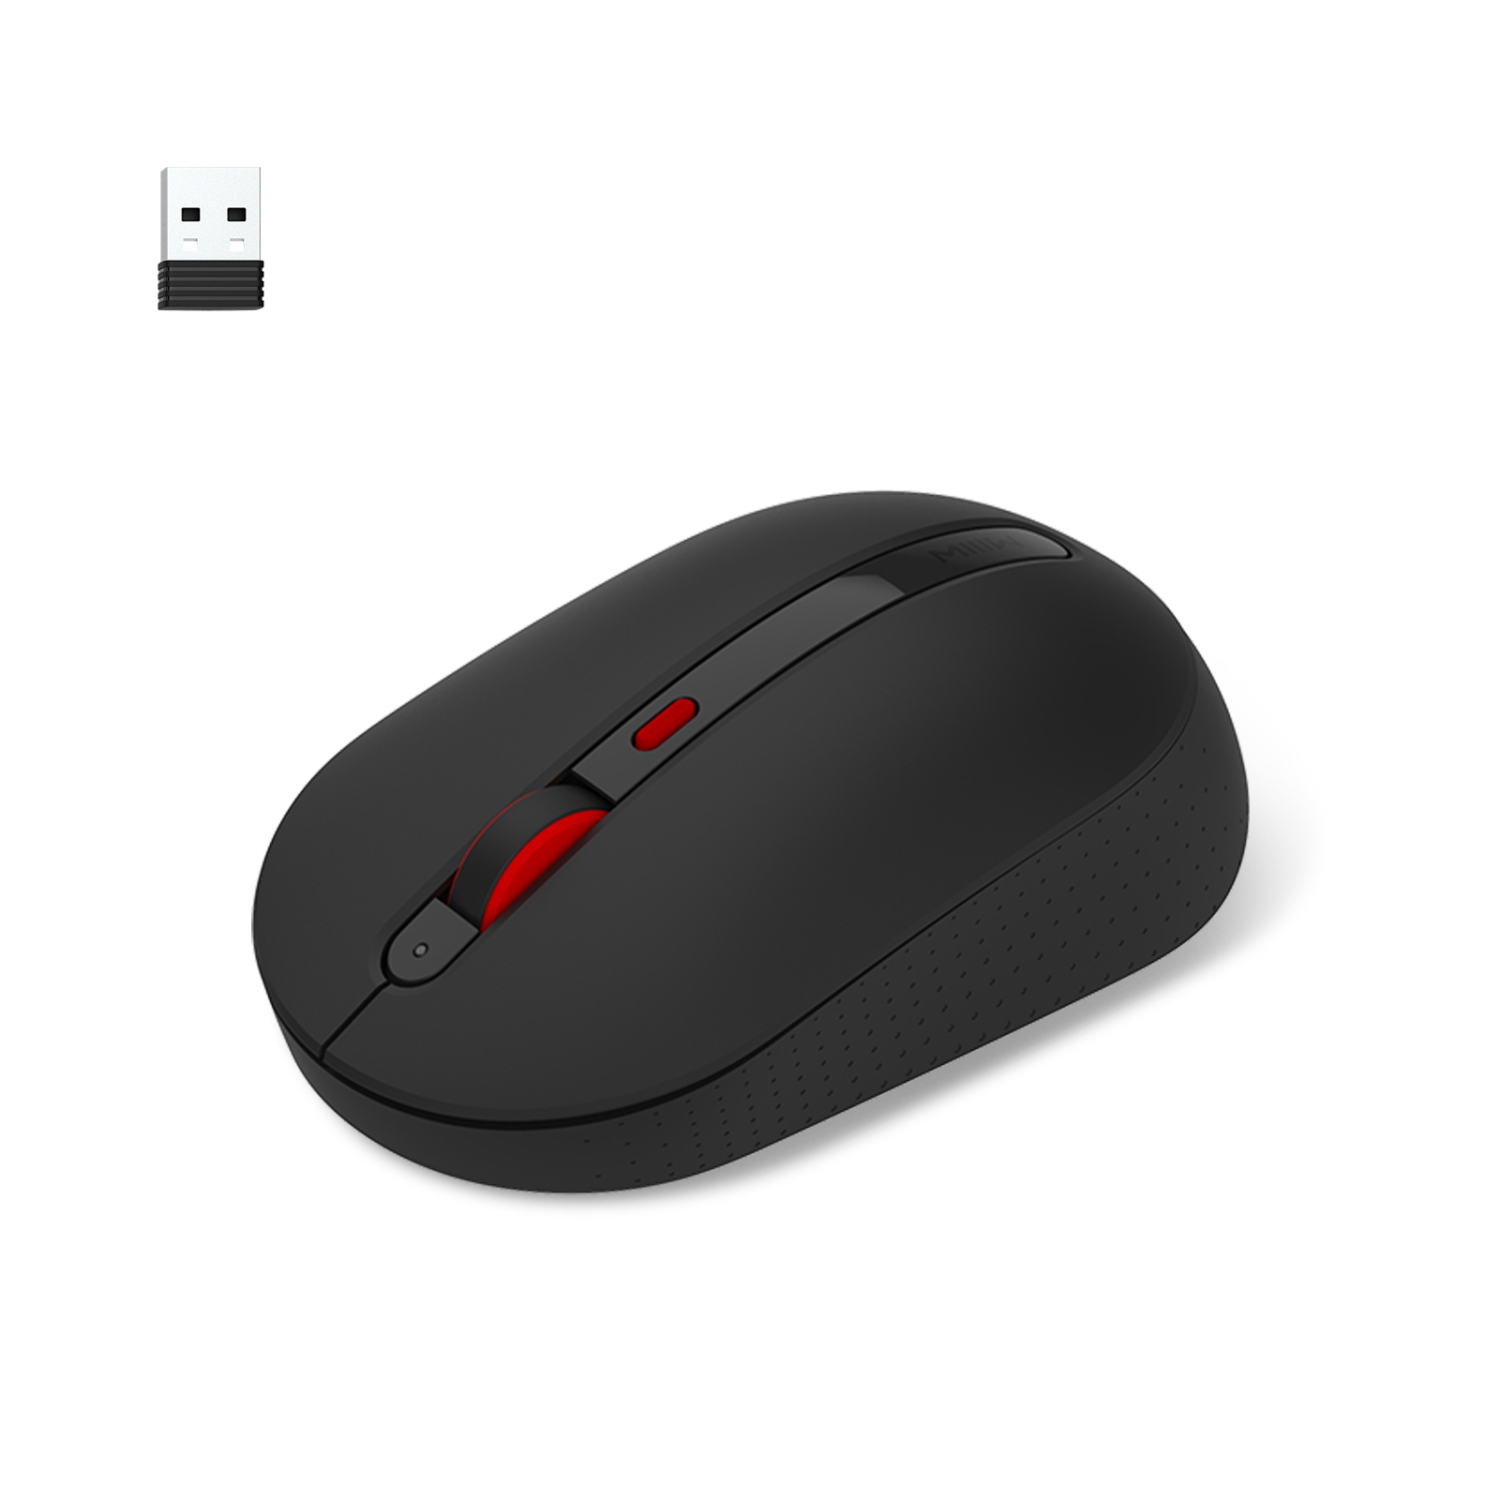 XIAOMI MIIIW M20 2.4G Silent Wireless Mouse with Nano Receiver, 3 Adjustable DPI Levels, Black